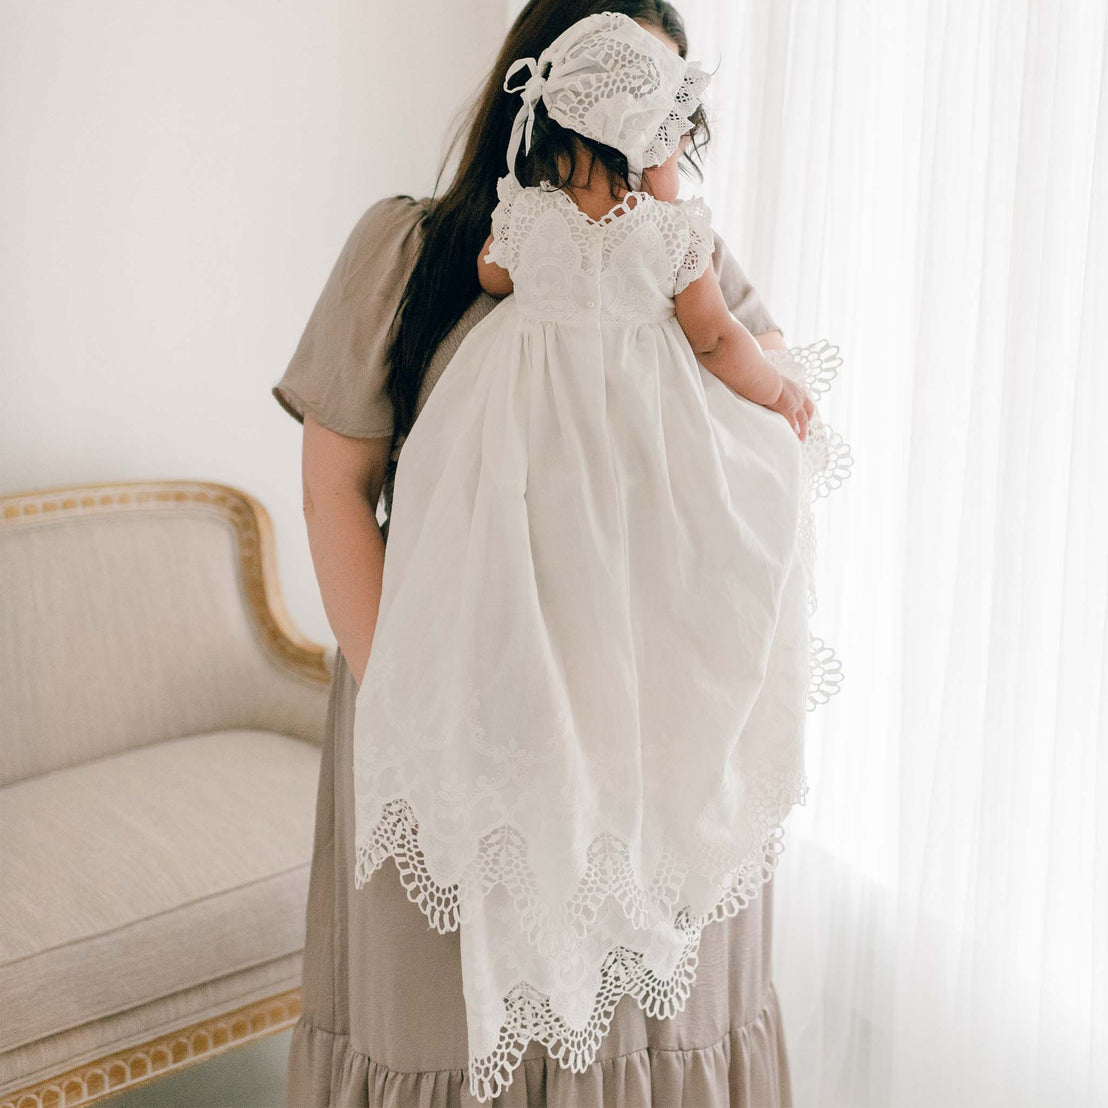 Photo of a baby wearing a Lily Christening Gown & Bonnet. She is held by her mom and the photo showcases the back of the bodice and skirt designs